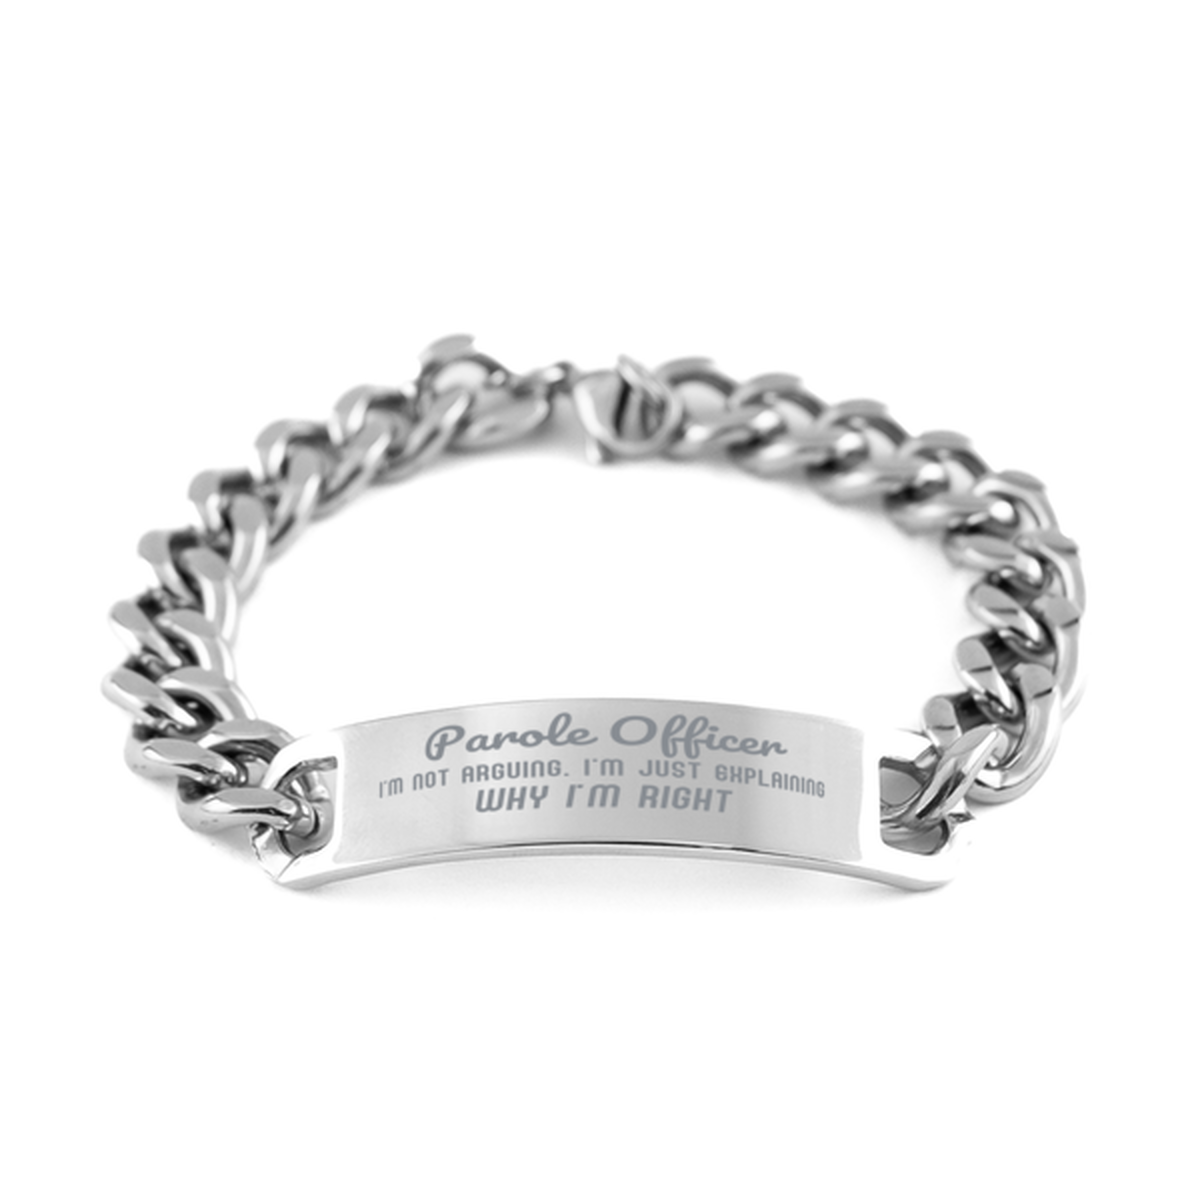 Parole Officer I'm not Arguing. I'm Just Explaining Why I'm RIGHT Cuban Chain Stainless Steel Bracelet, Graduation Birthday Christmas Parole Officer Gifts For Parole Officer Funny Saying Quote Present for Men Women Coworker